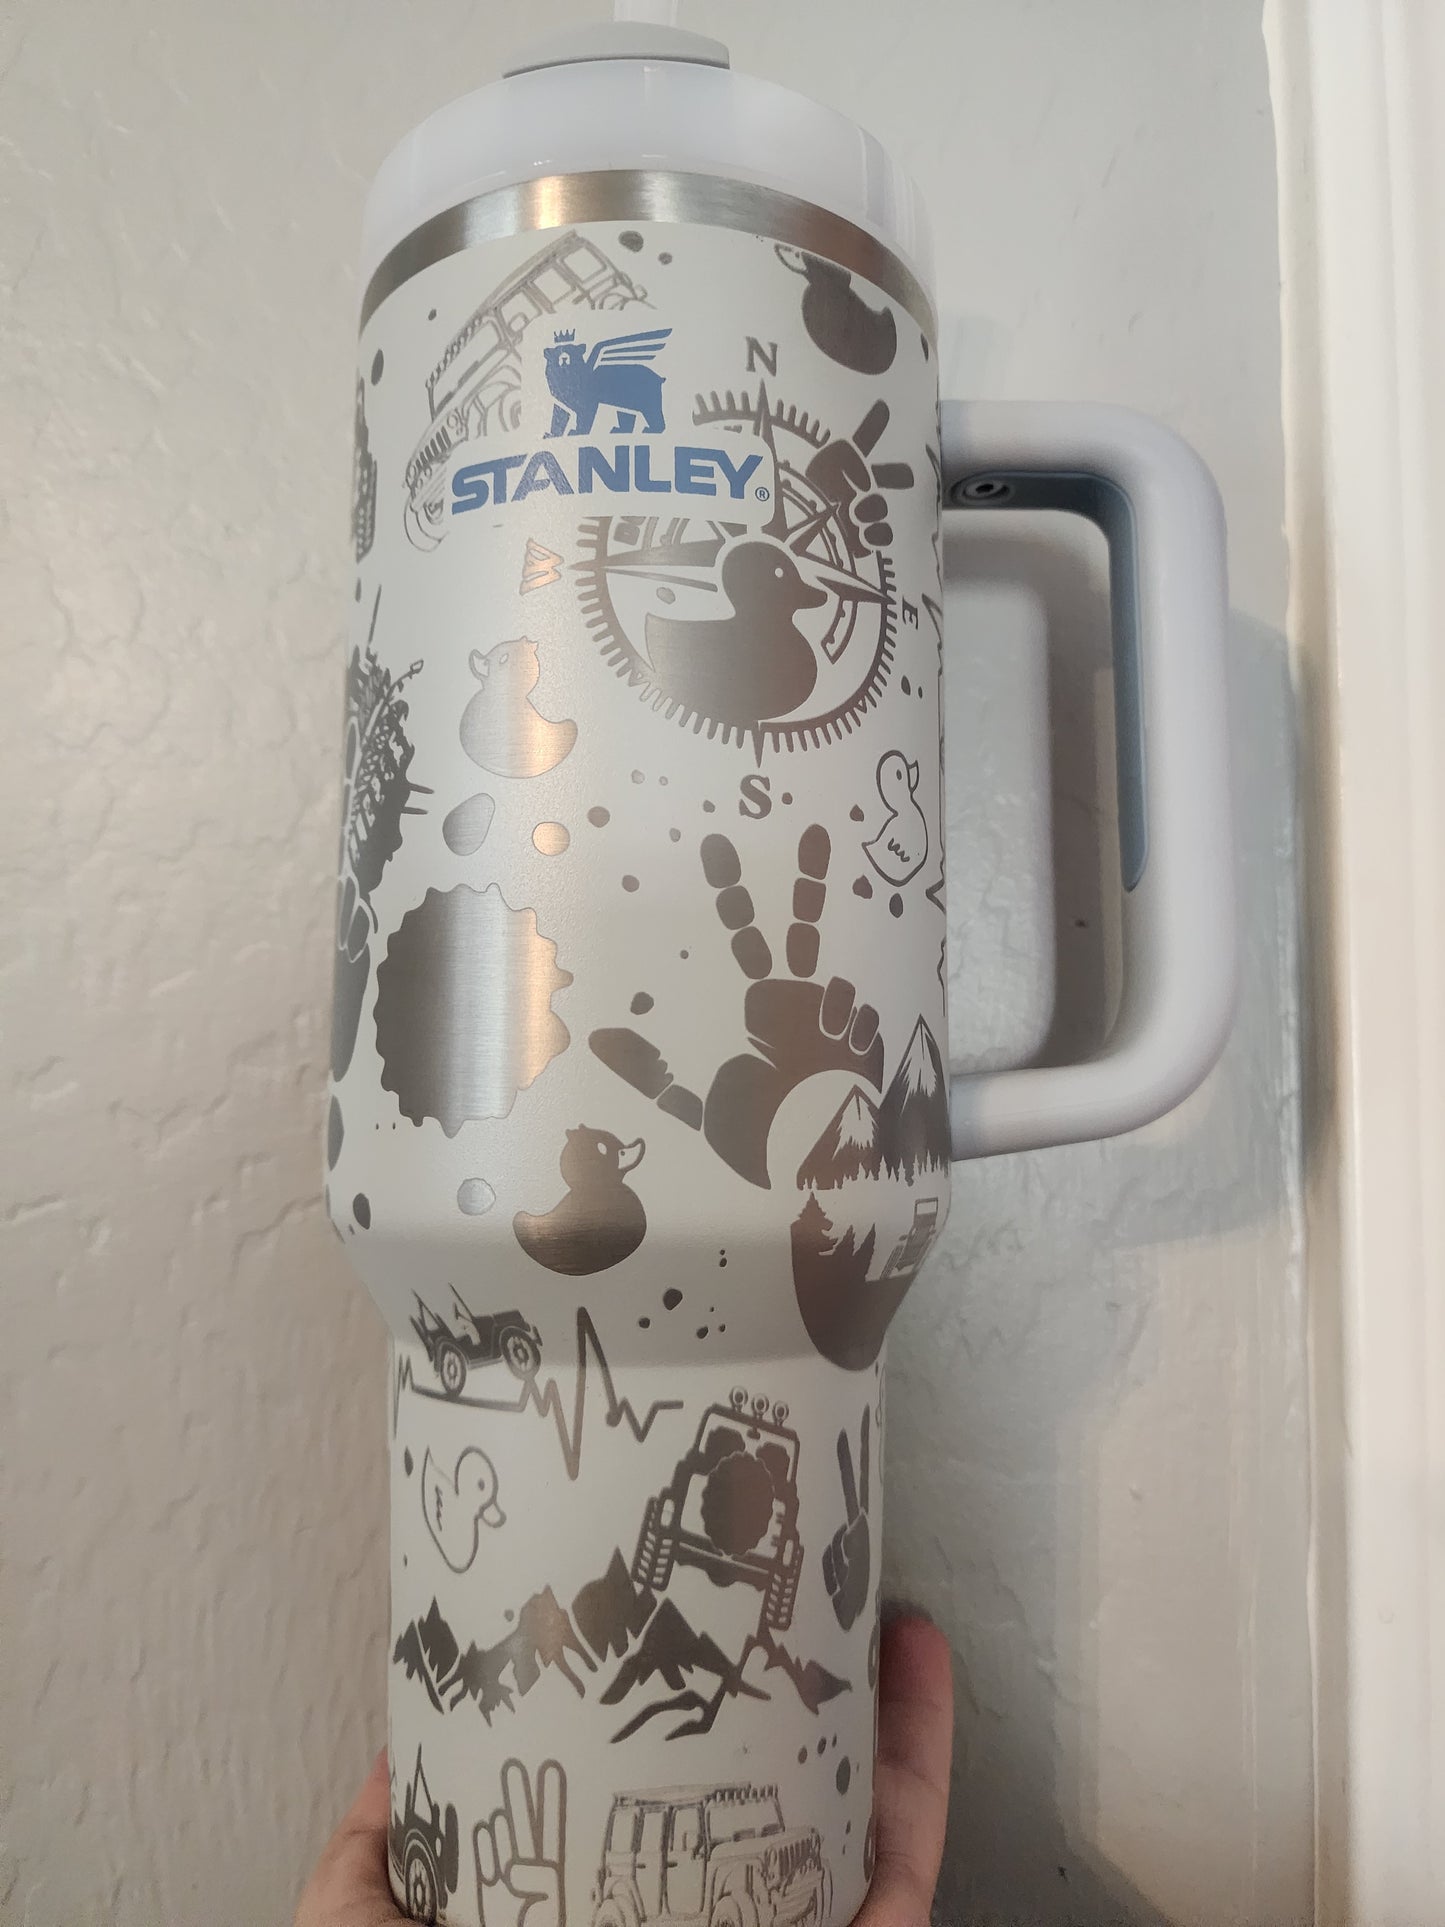 40 Oz Engraved Stanley Jeep Lover